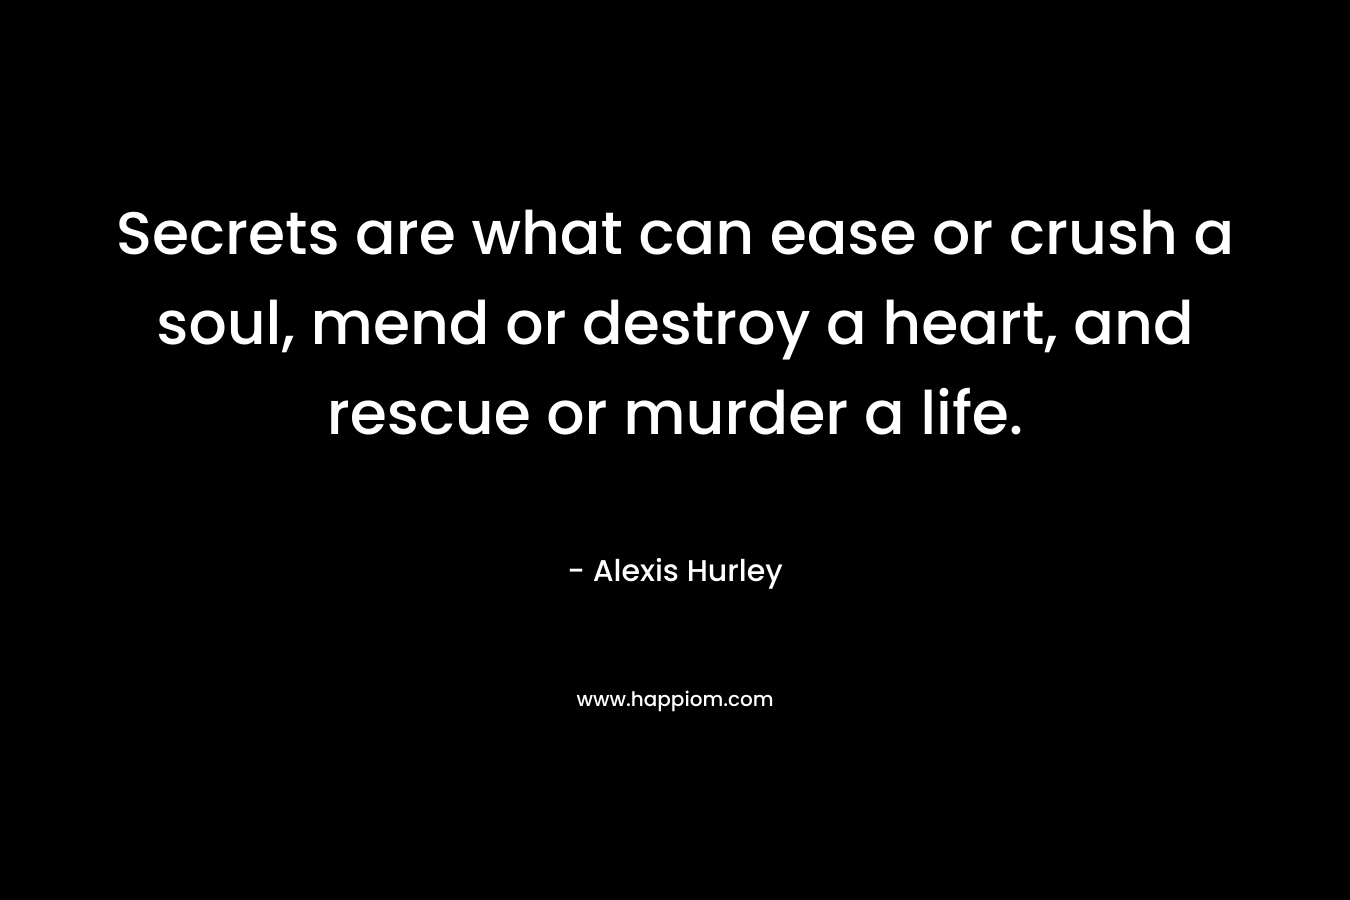 Secrets are what can ease or crush a soul, mend or destroy a heart, and rescue or murder a life.